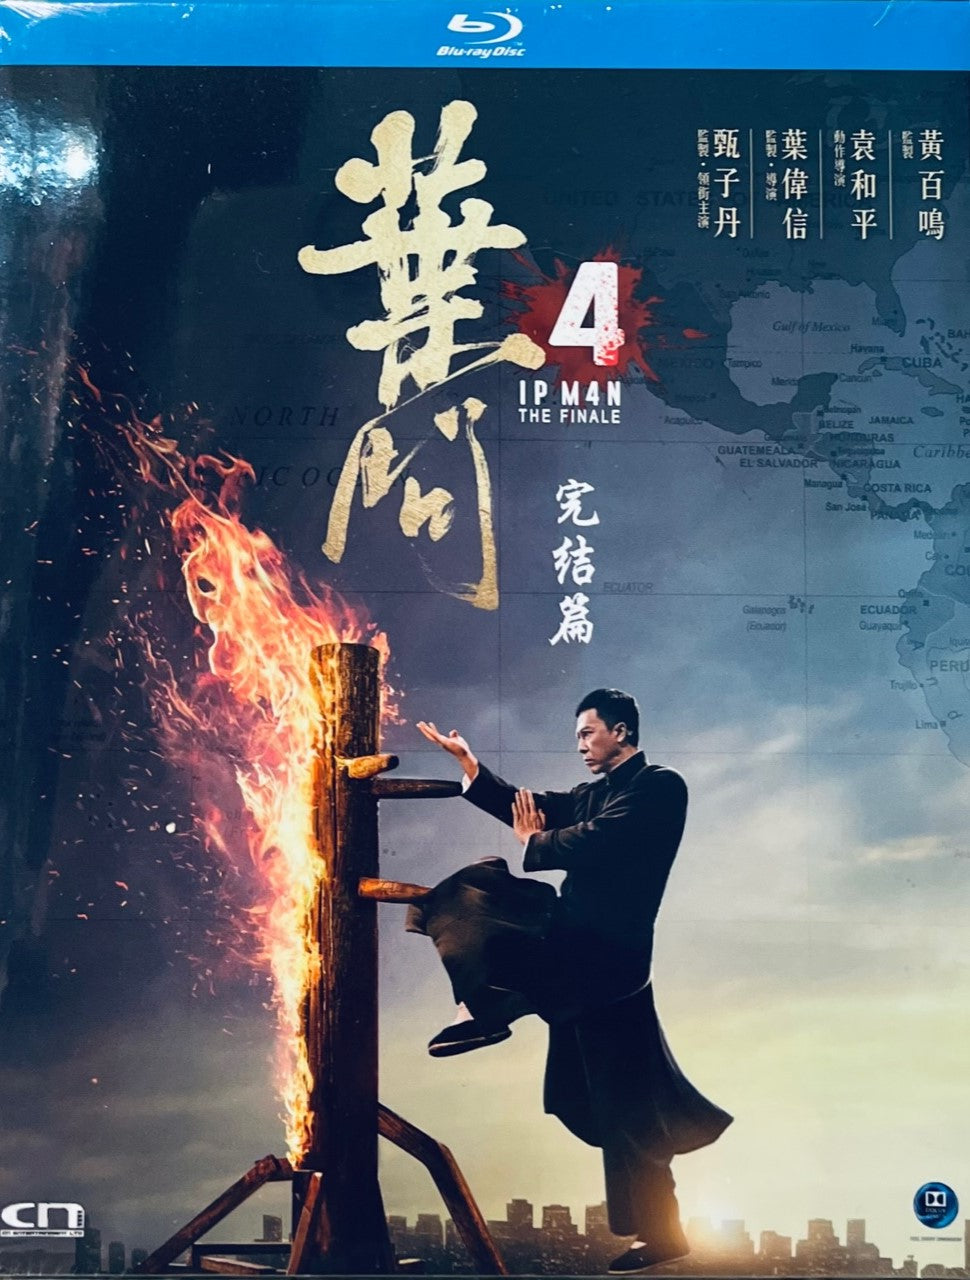 Ip Man: The Finale 2019  (Hong Kong Movie) BLU-RAY with English Subtitles (Region Free)